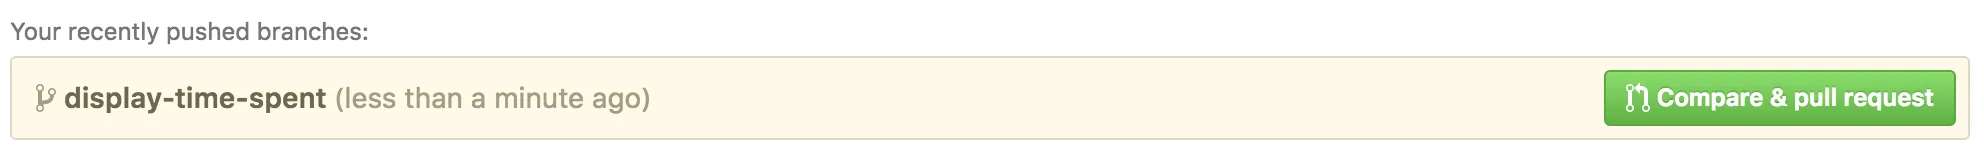 GitHub’s help message to quickly create a pull request.